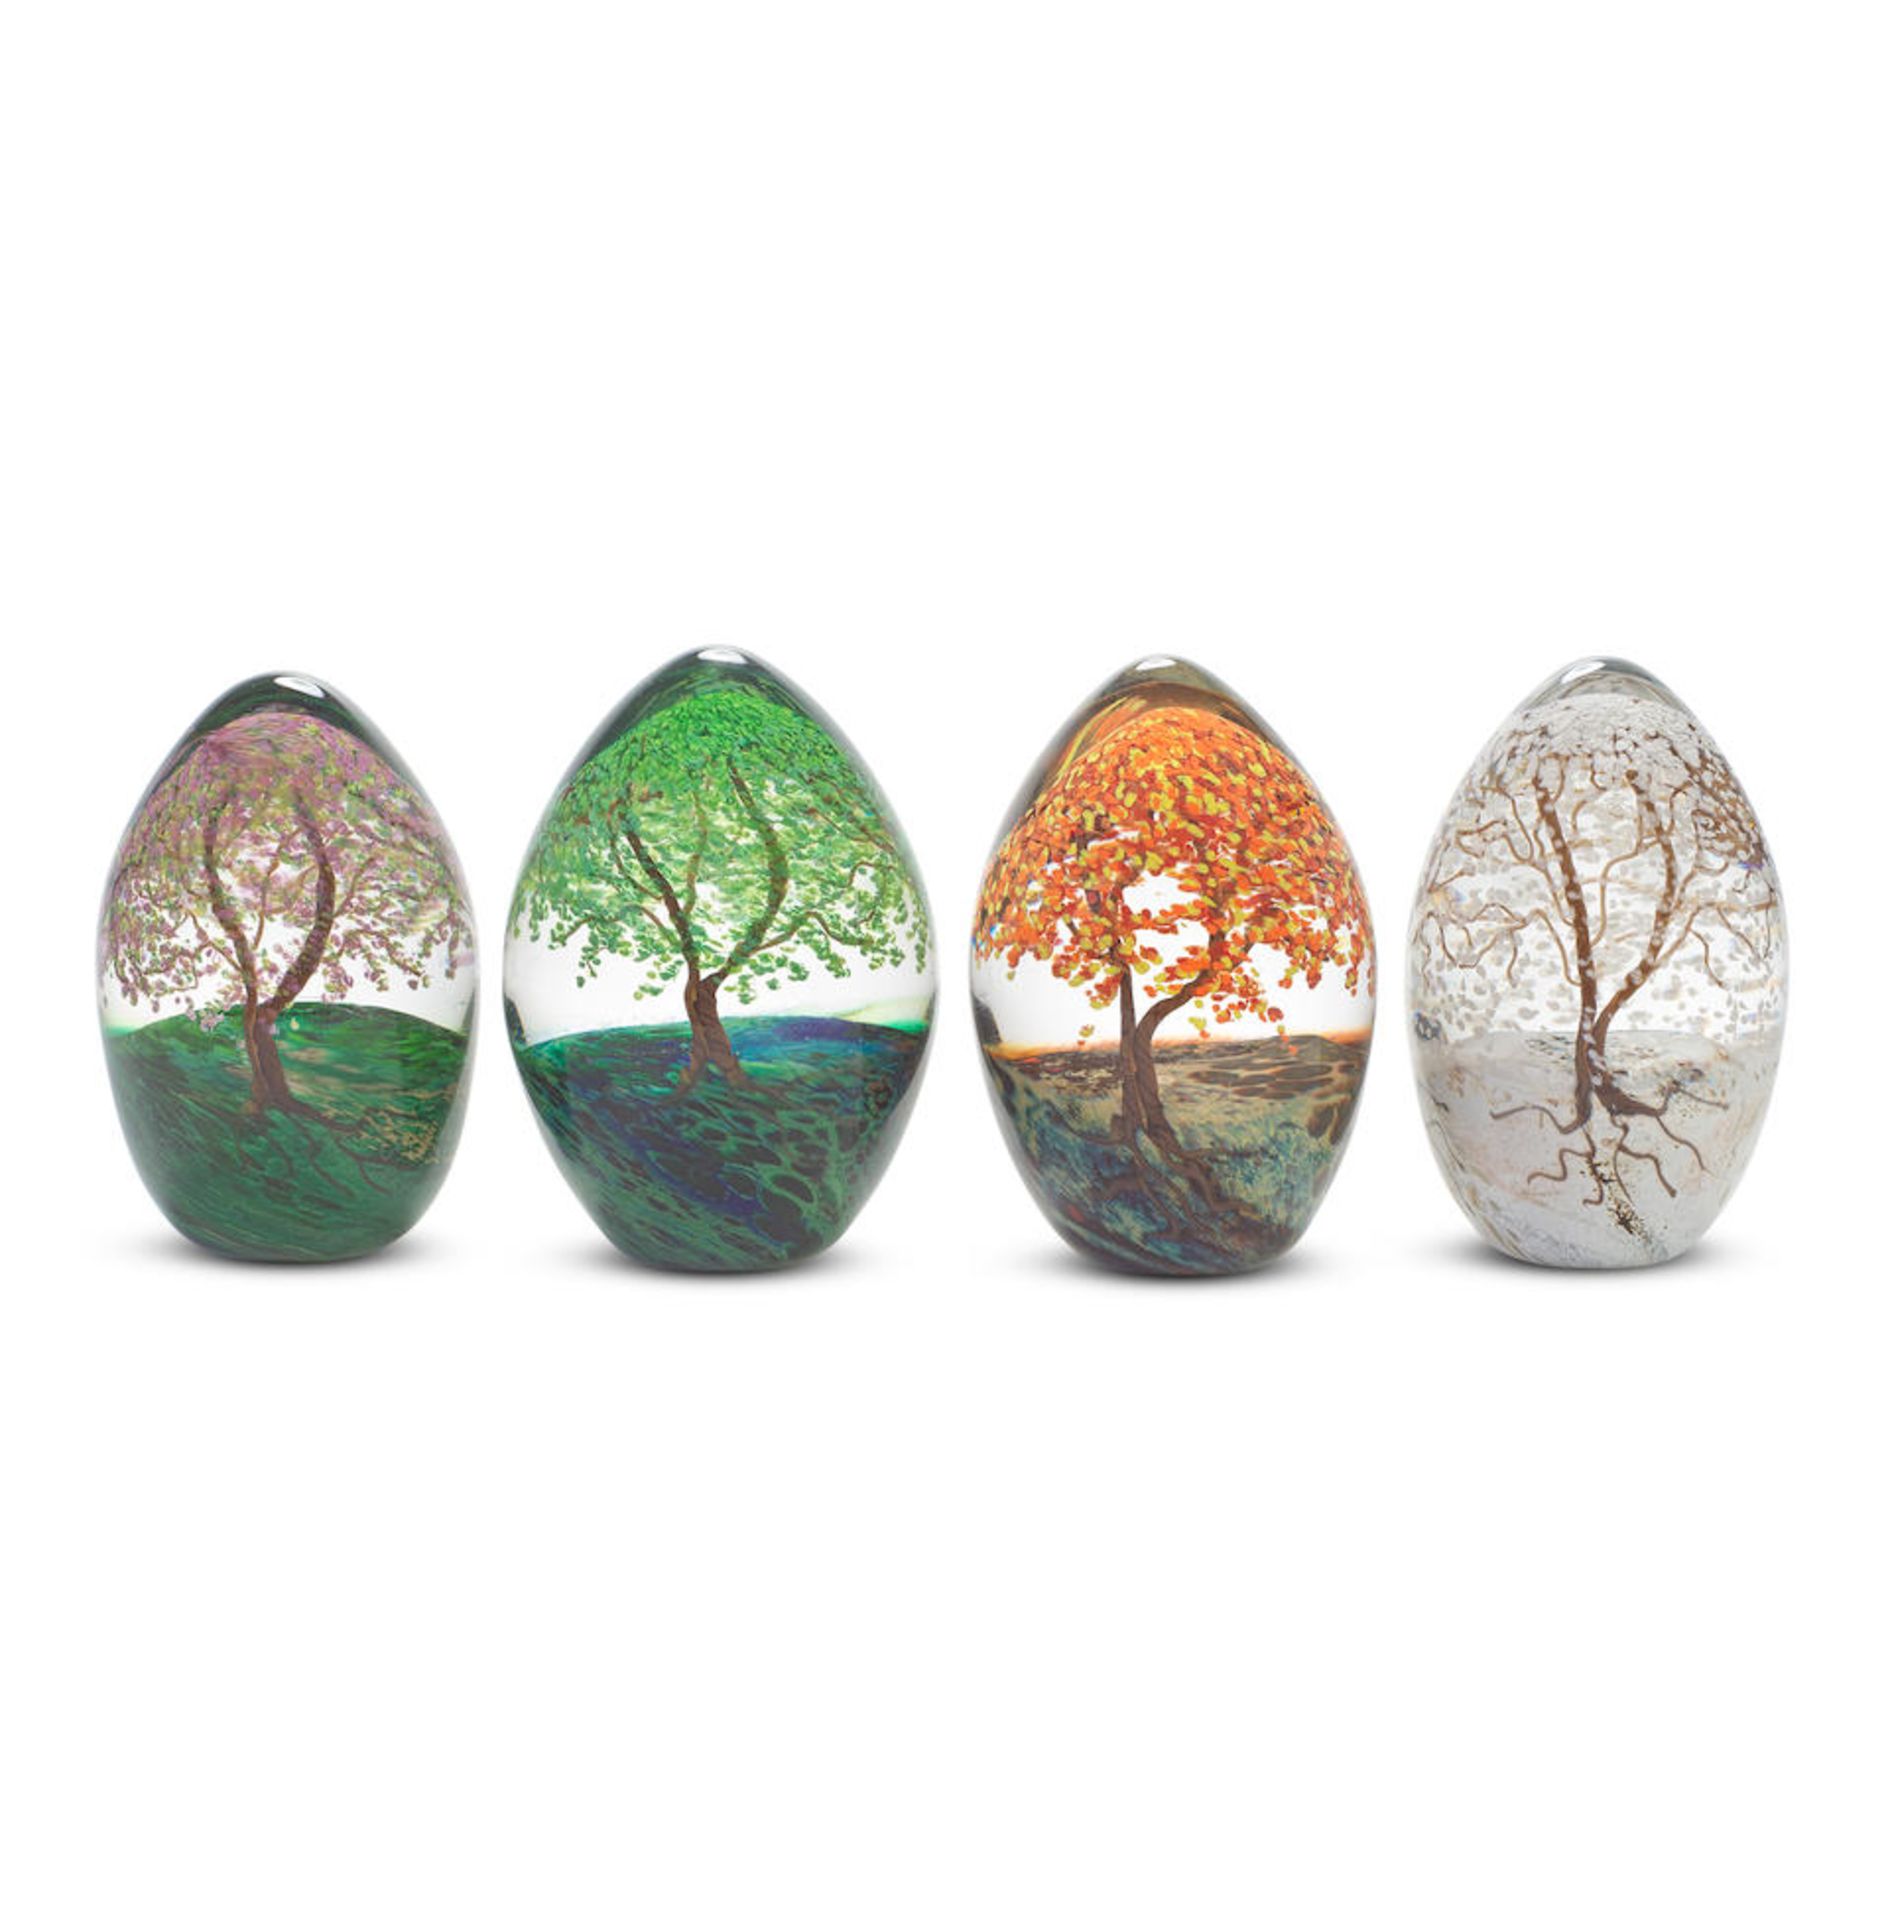 A set of four Cathy Richardson upright paperweights from the 'Forest Seed' series, dated 2008